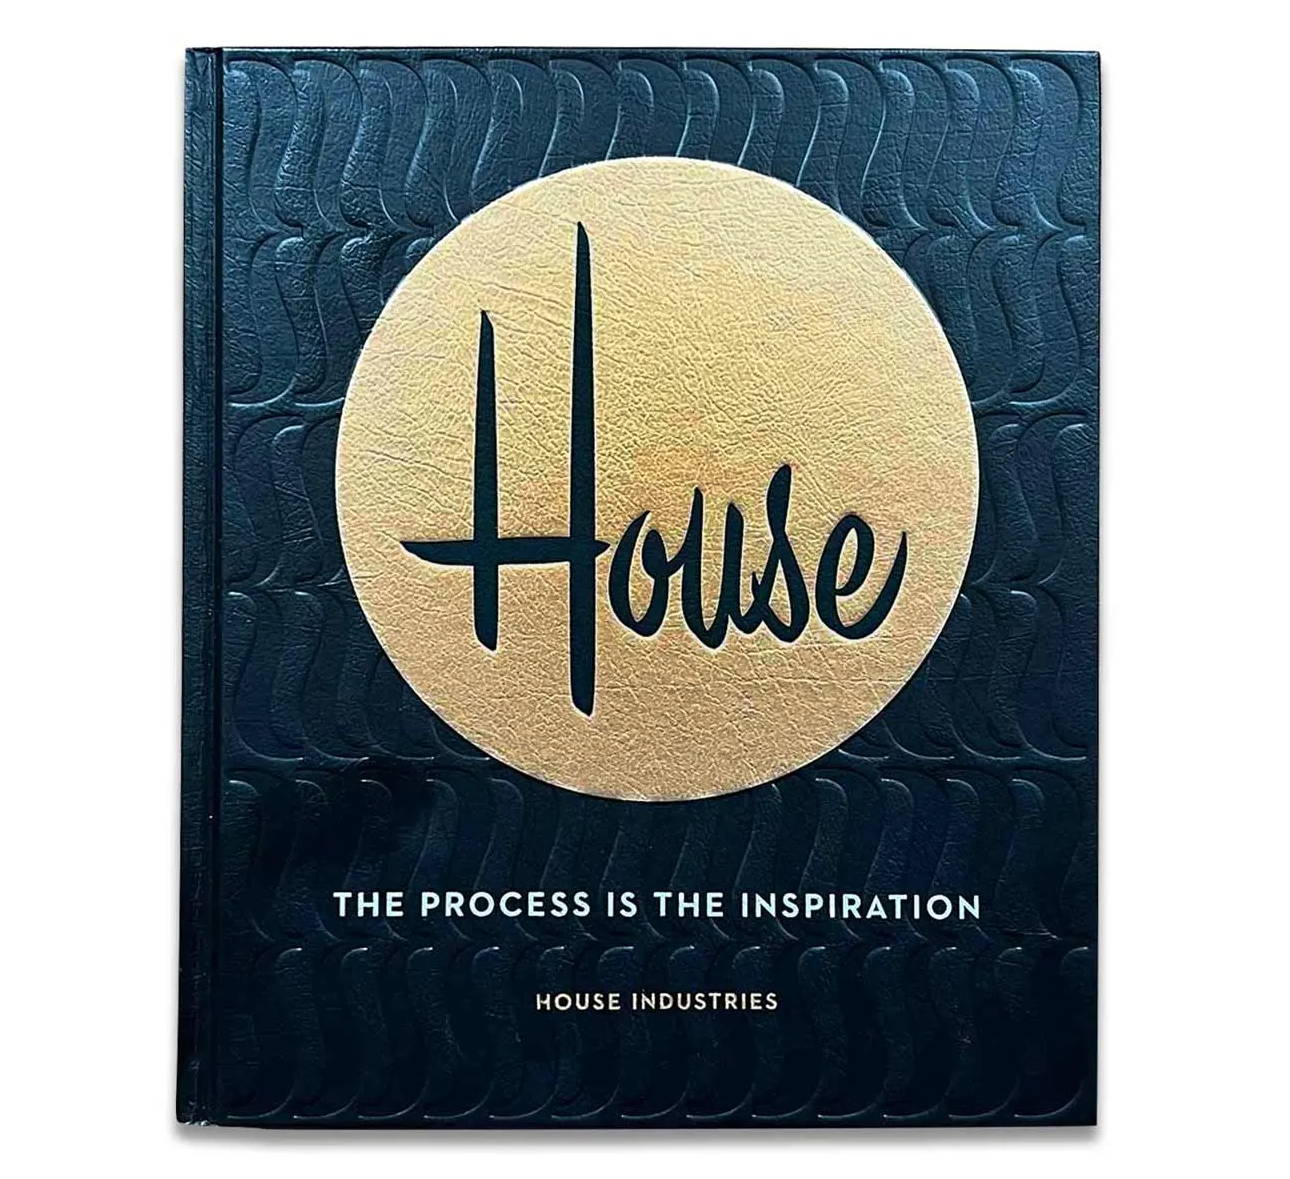 House Industries: The Process is the Inspiration